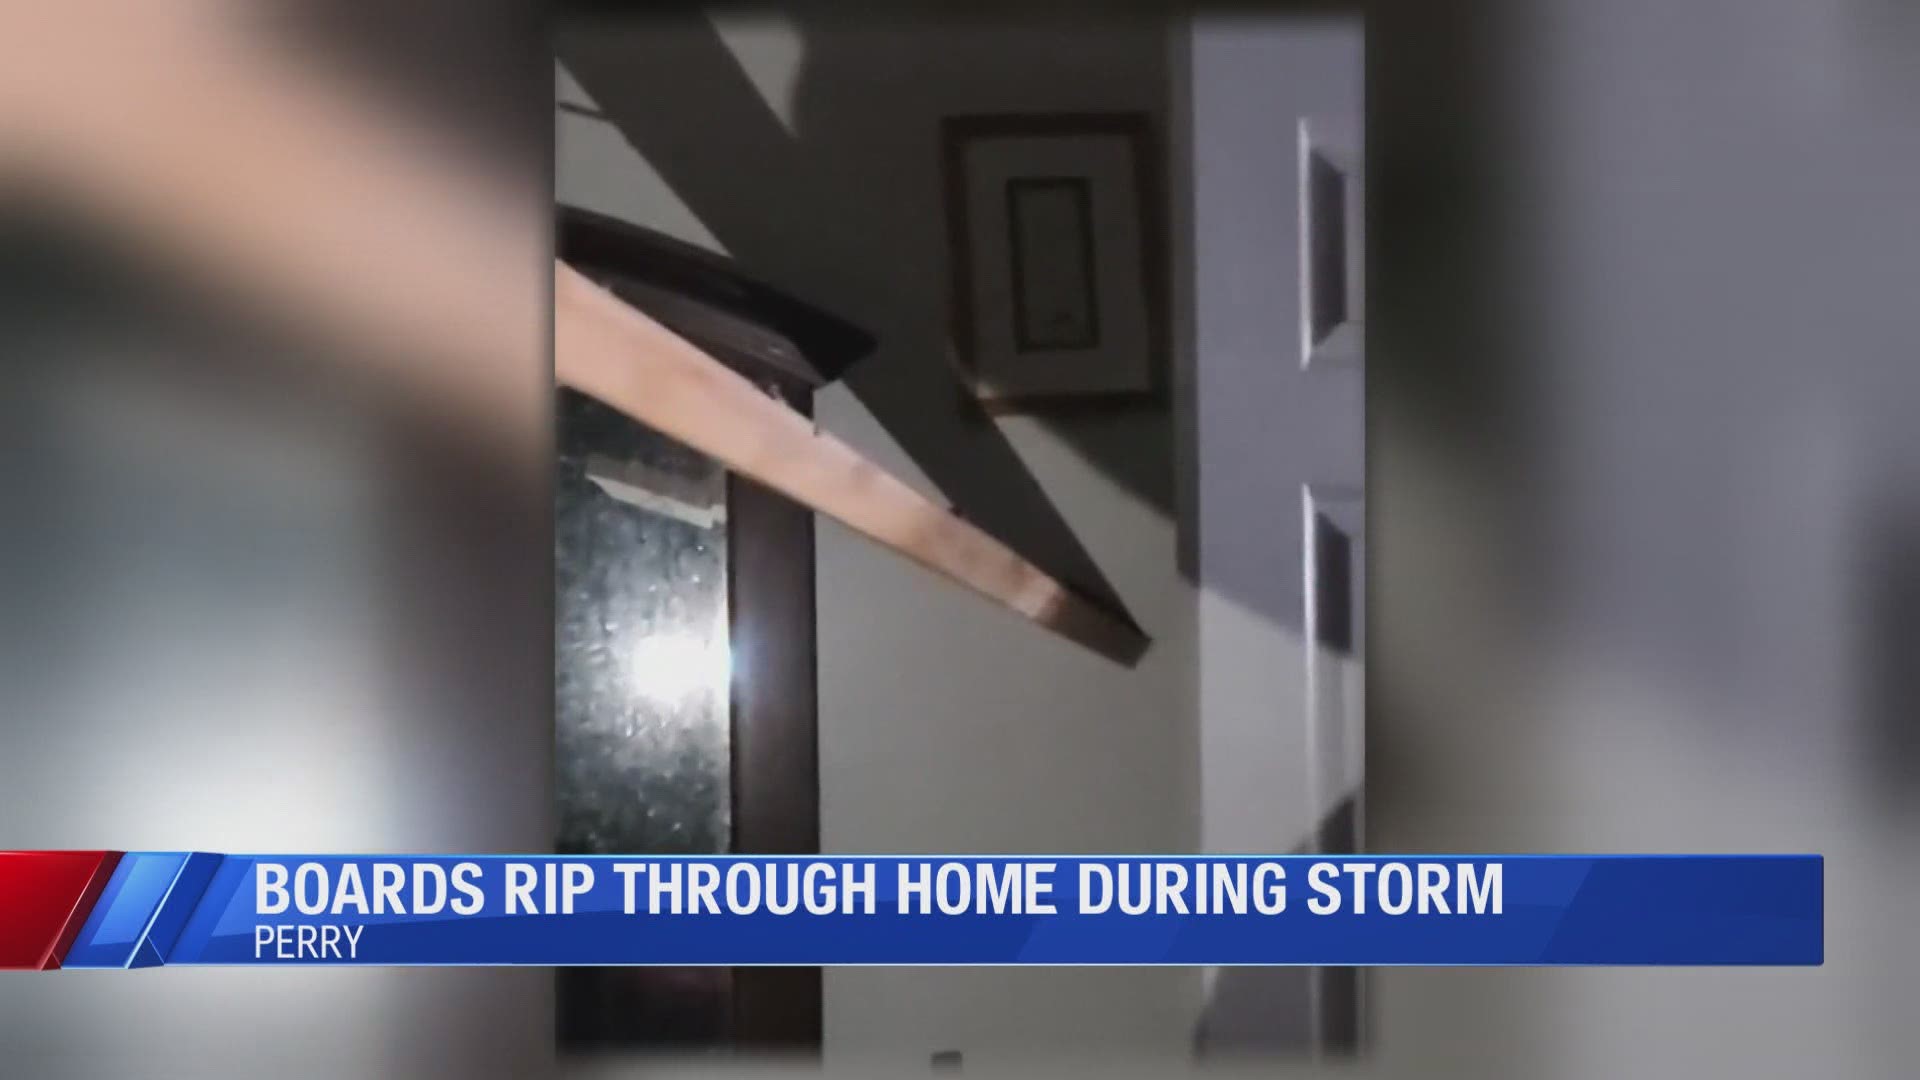 Jennifer Pickering was staying at her brother's home when the severe weather rolled through Monday afternoon.